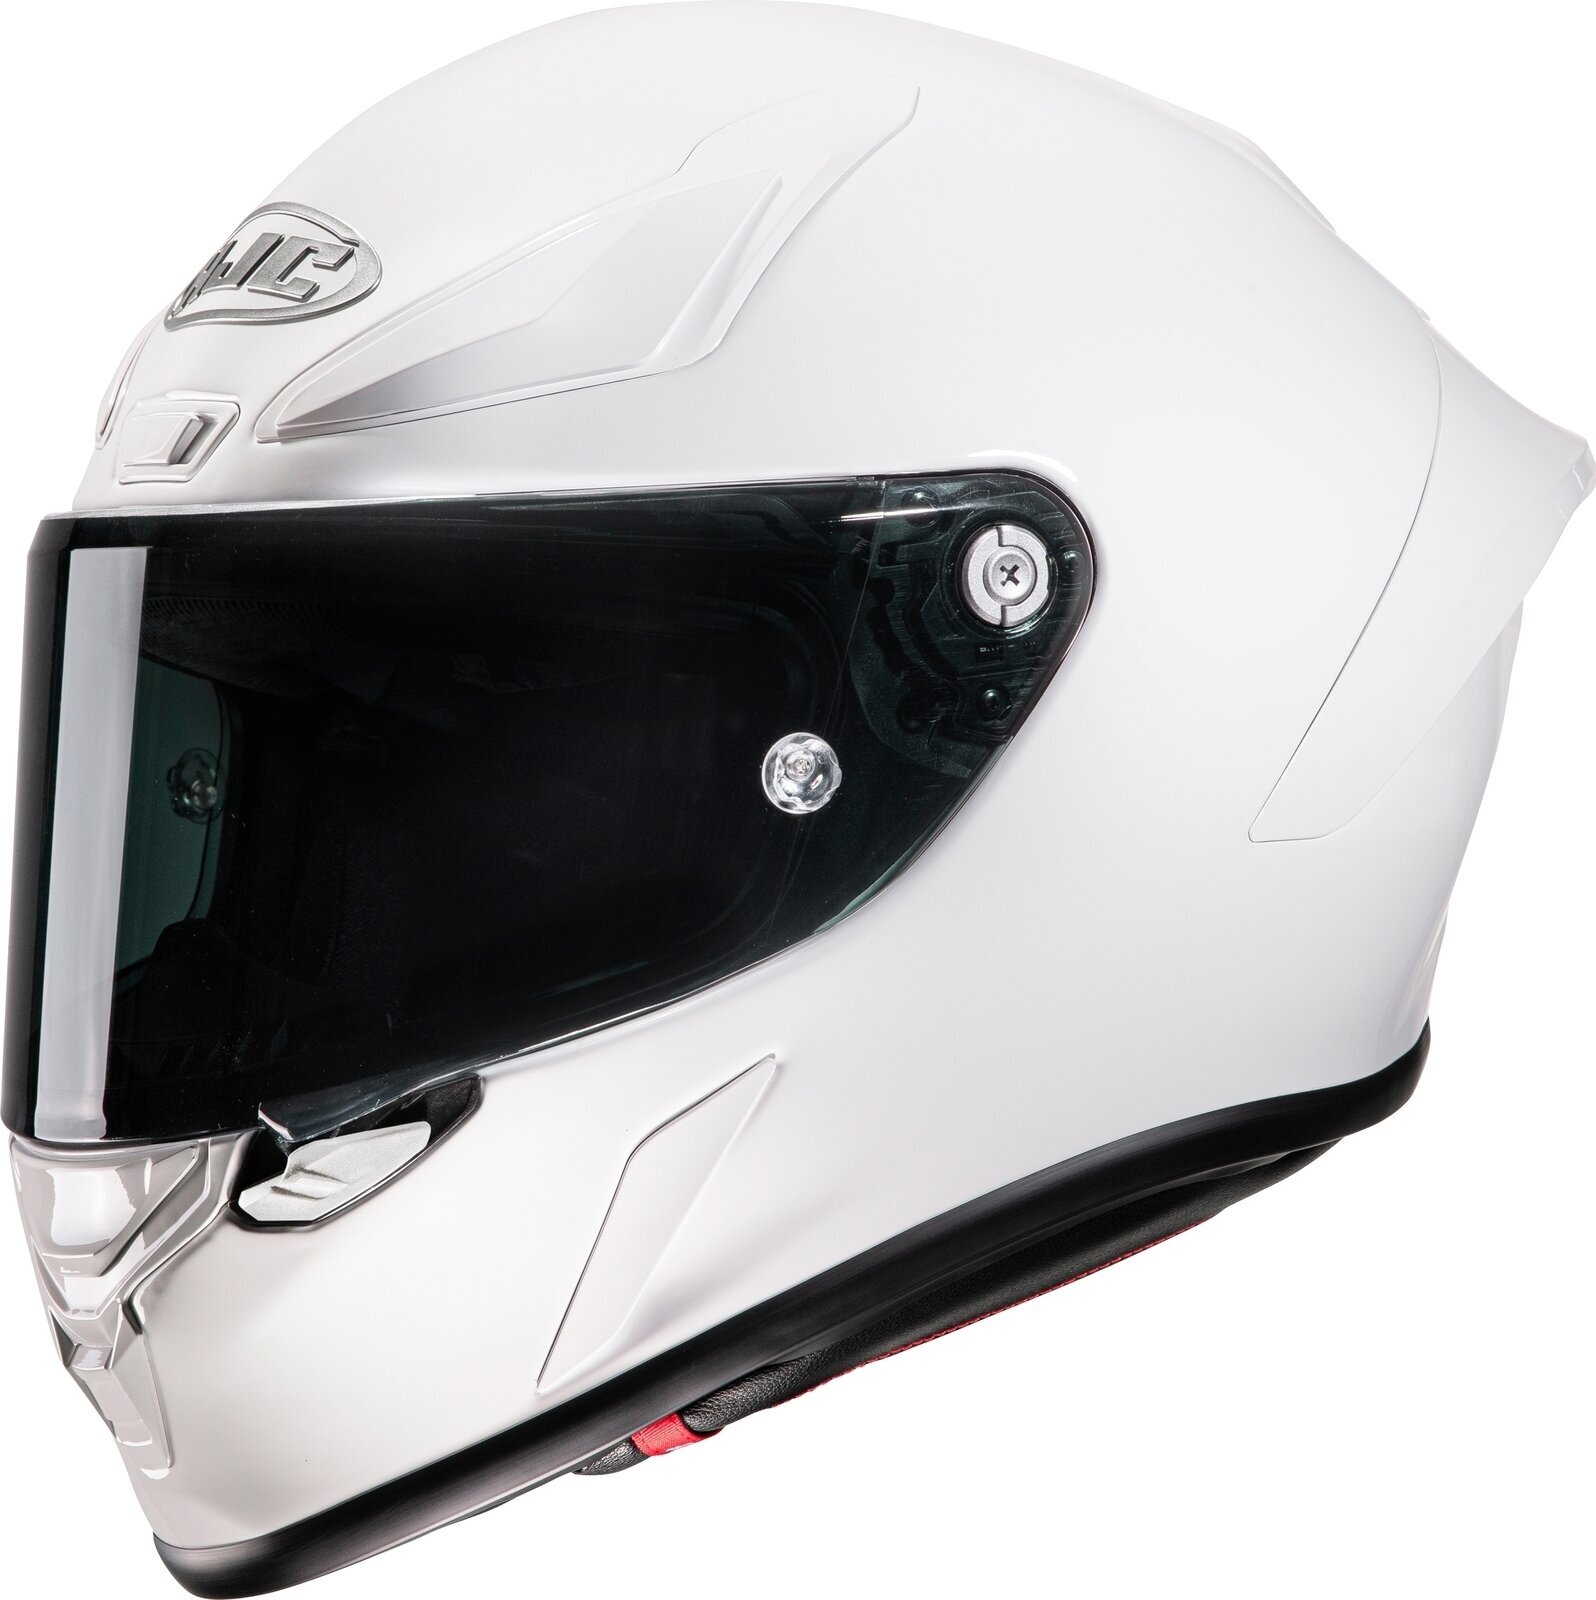 Helm HJC RPHA 1 Solid White XL Helm